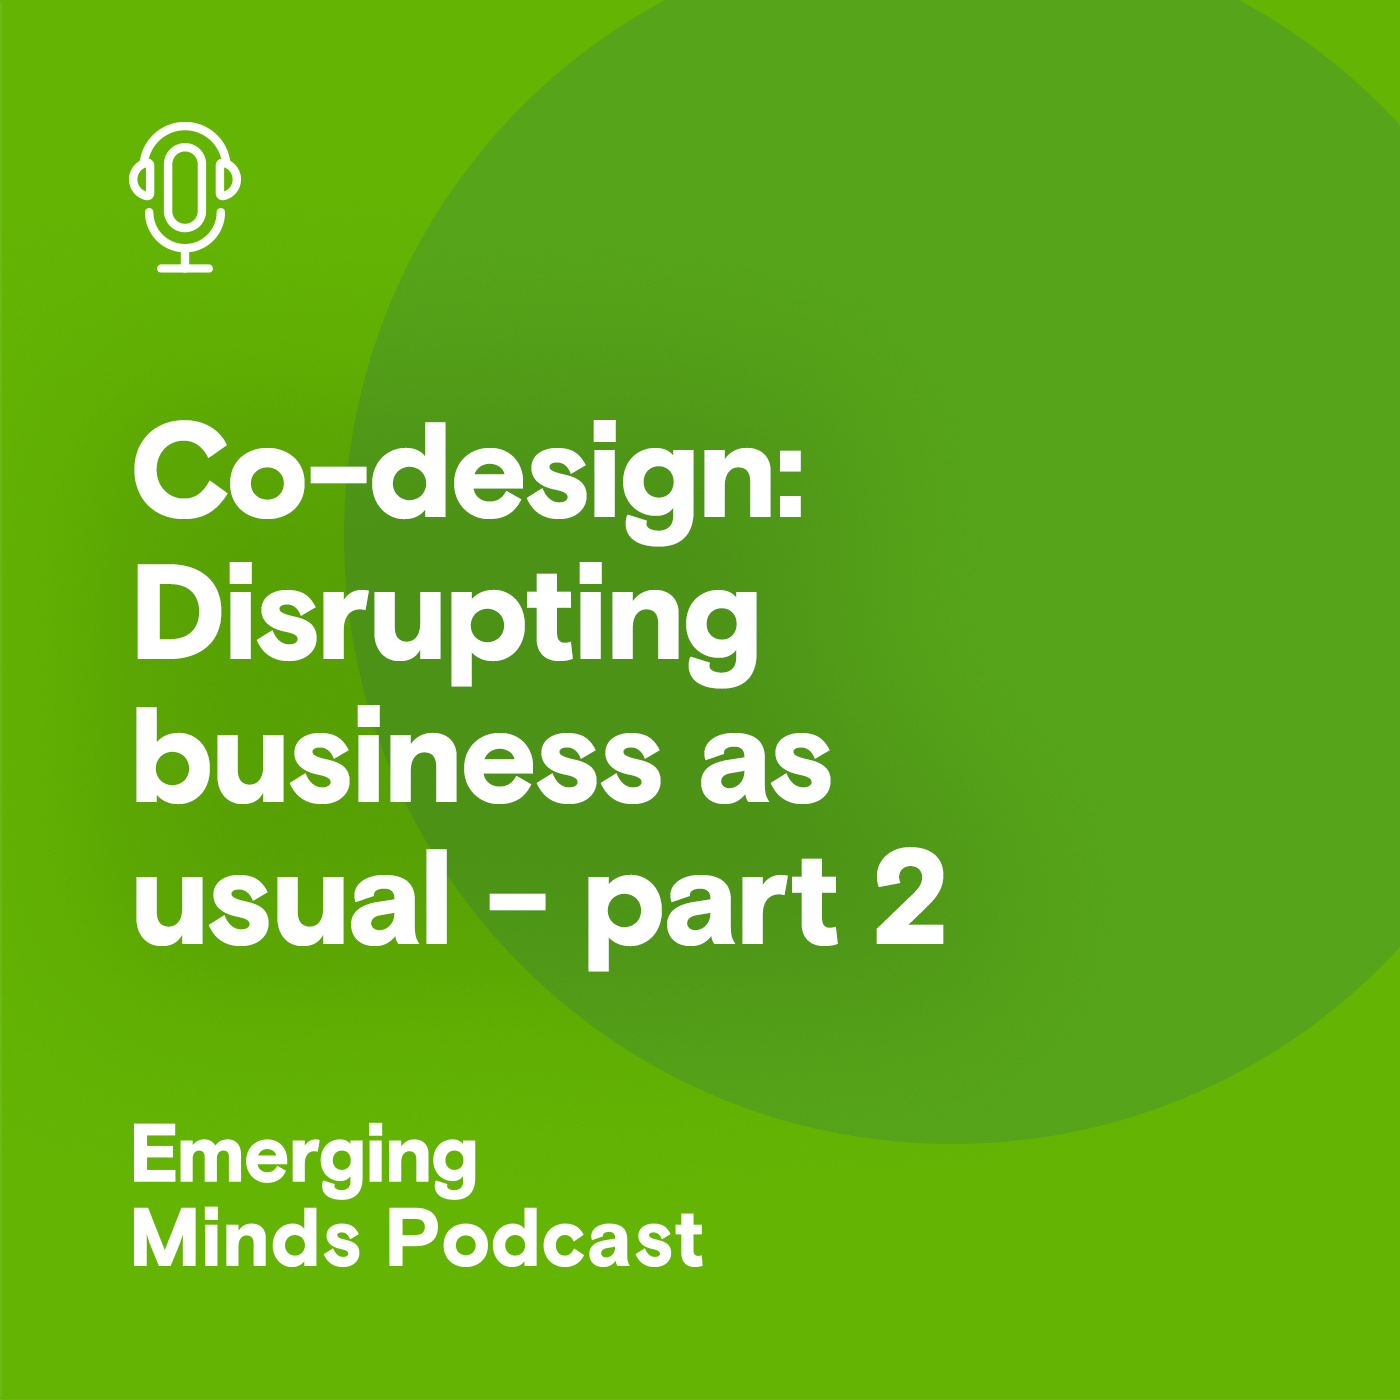 Co-design: Disrupting business as usual - part two